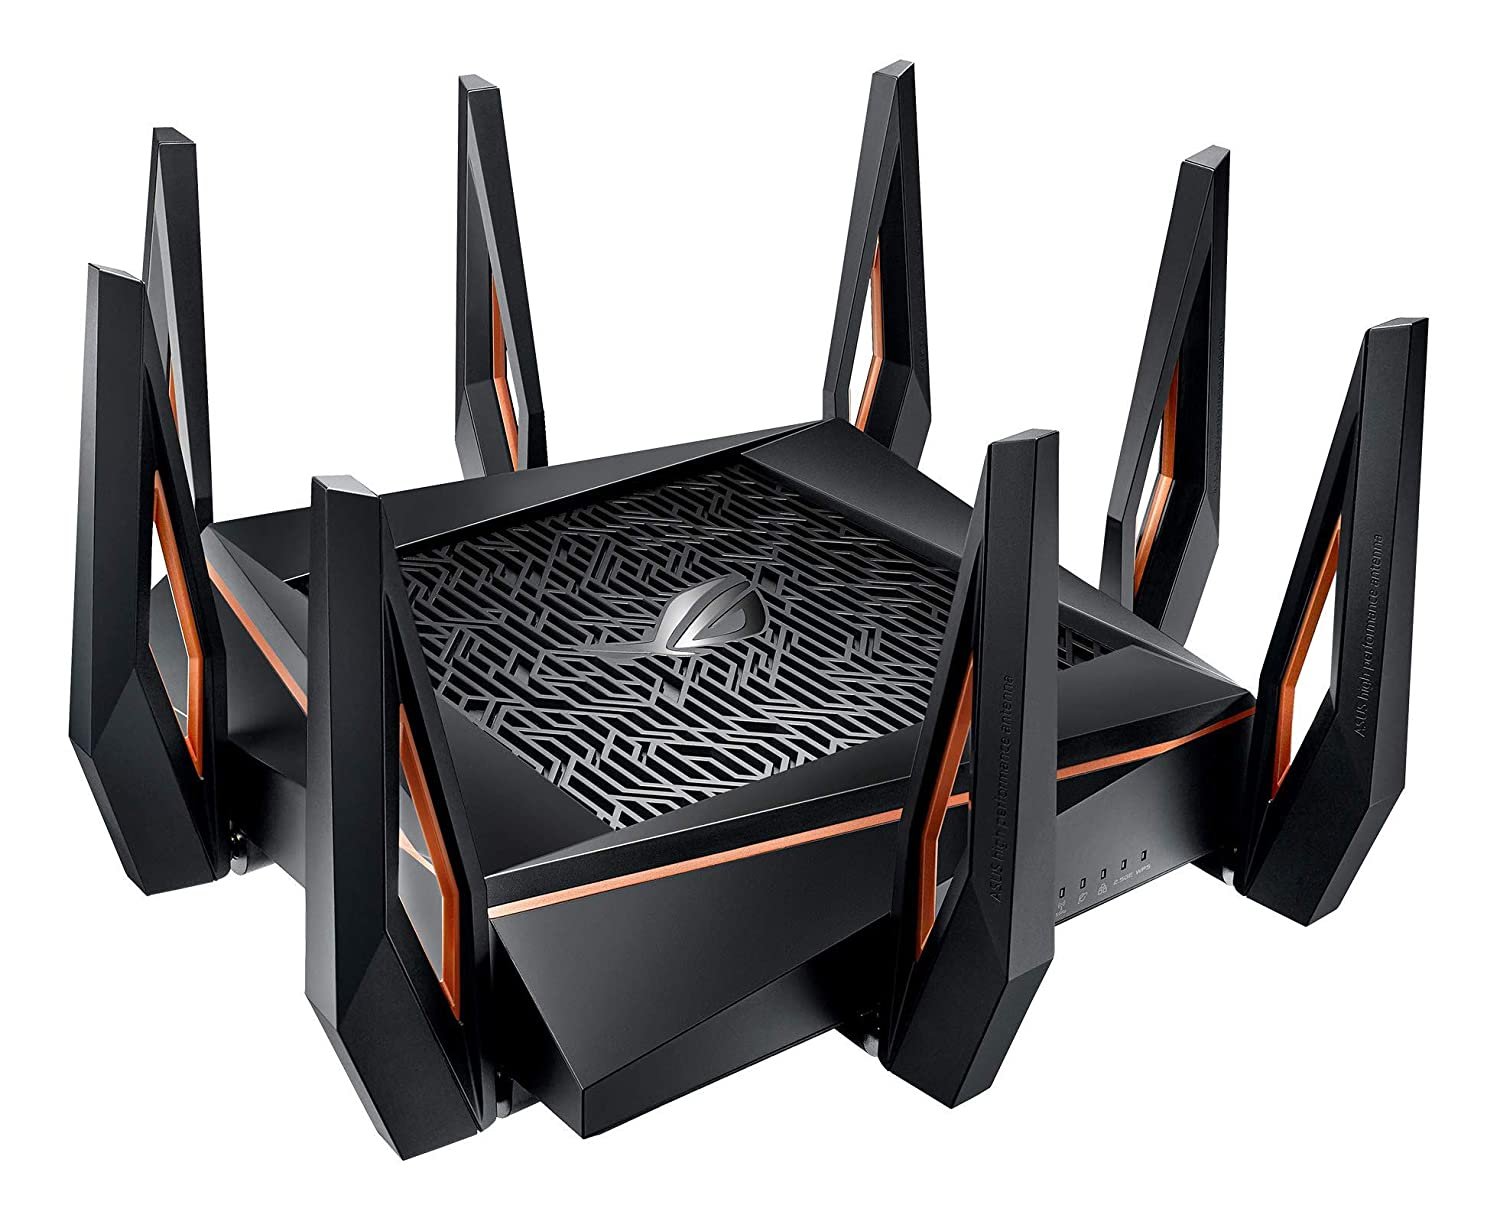 Asus ROG Rapture GT-AX11000 router